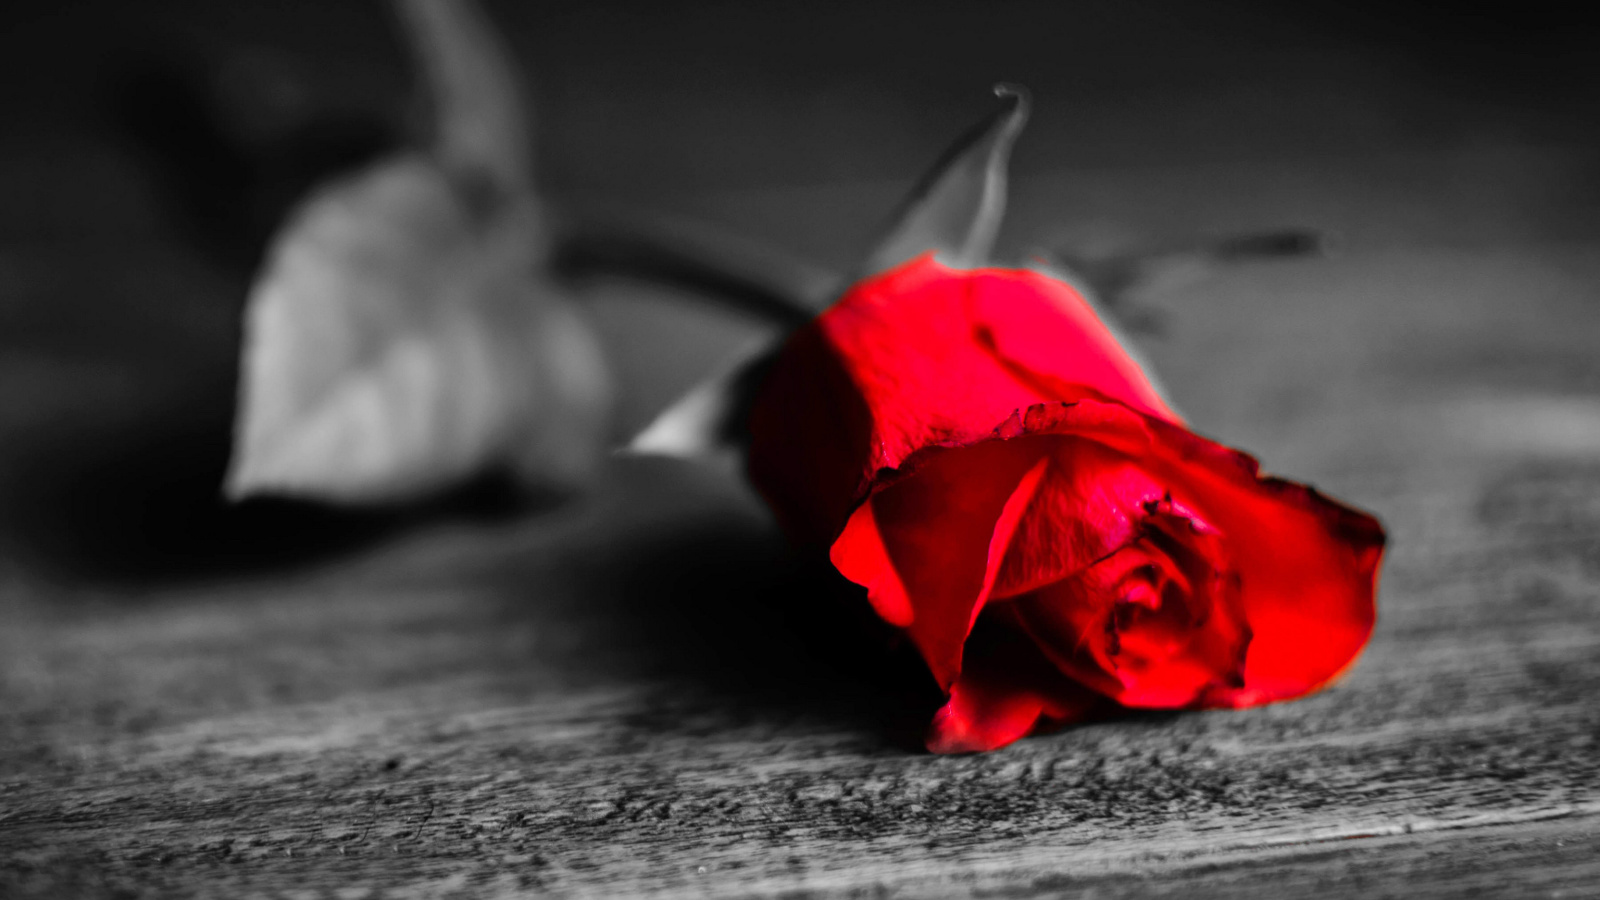 Red Rose On Wooden Surface wallpaper 1600x900